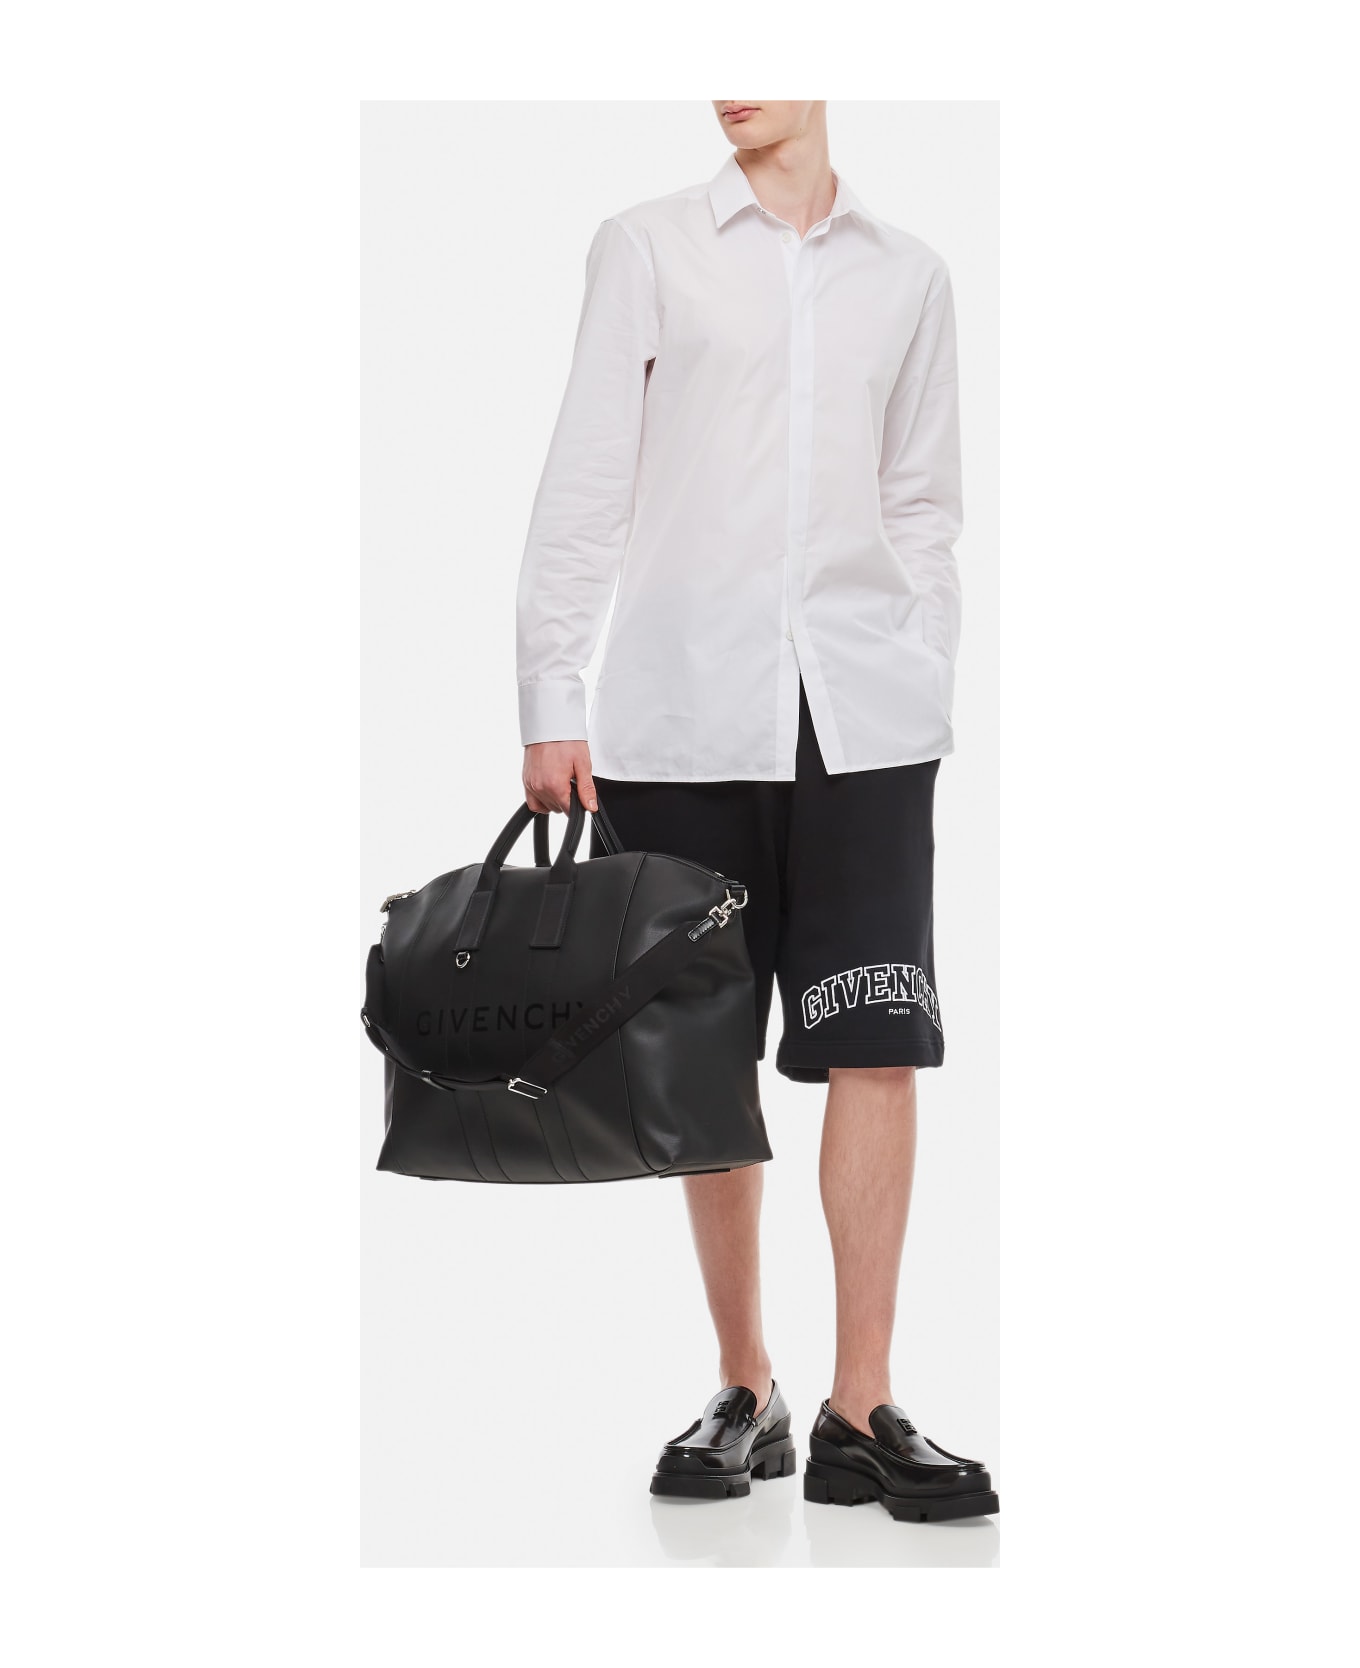 Givenchy 4g Embroidered Poplin Shirt - White シャツ